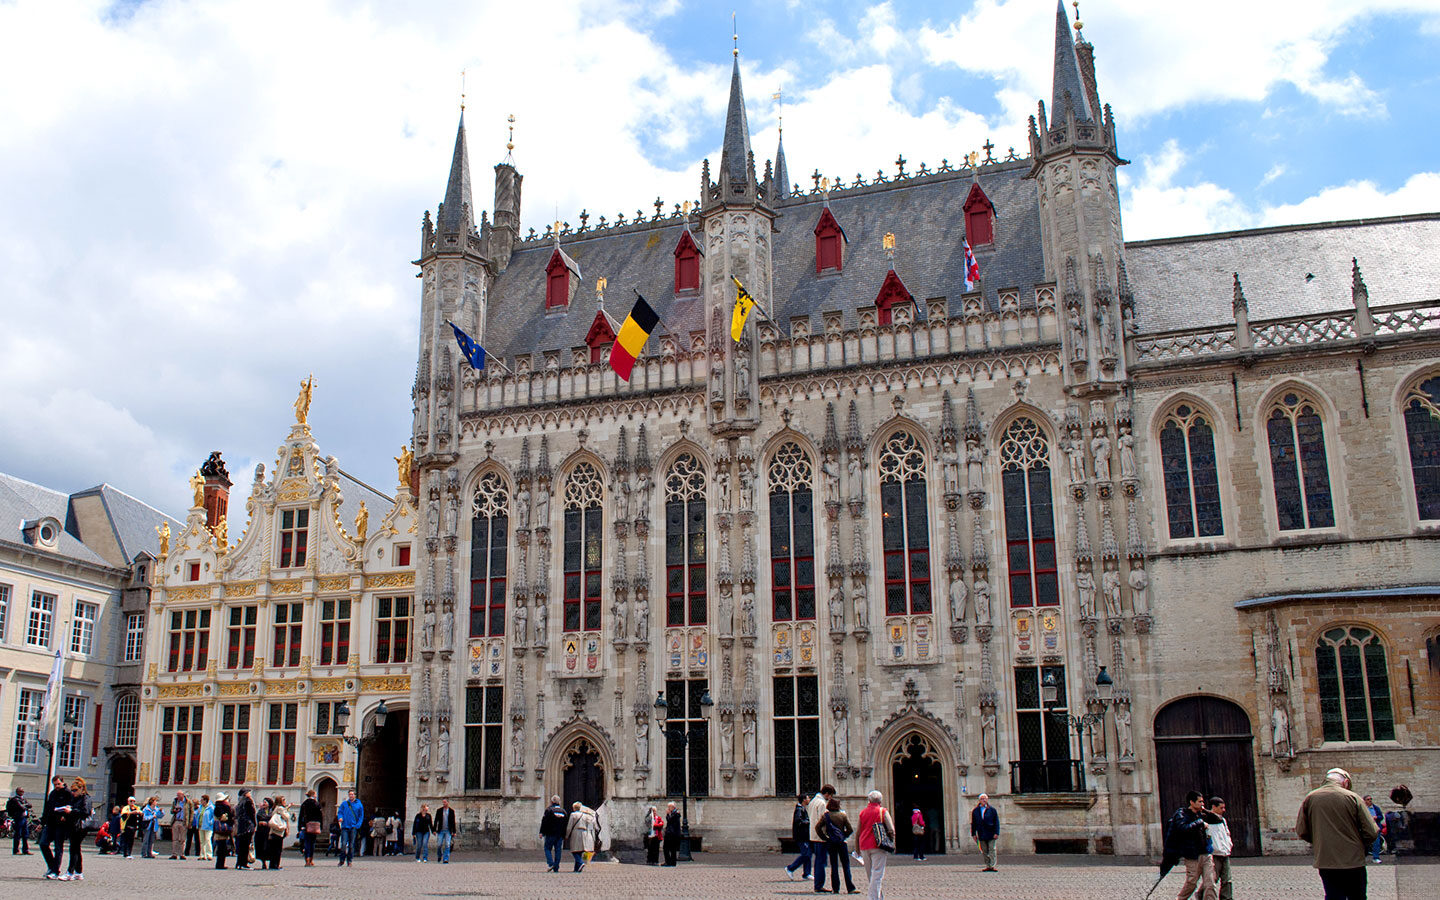 The historic Burg square and Staduis (City Hall) in Bruges